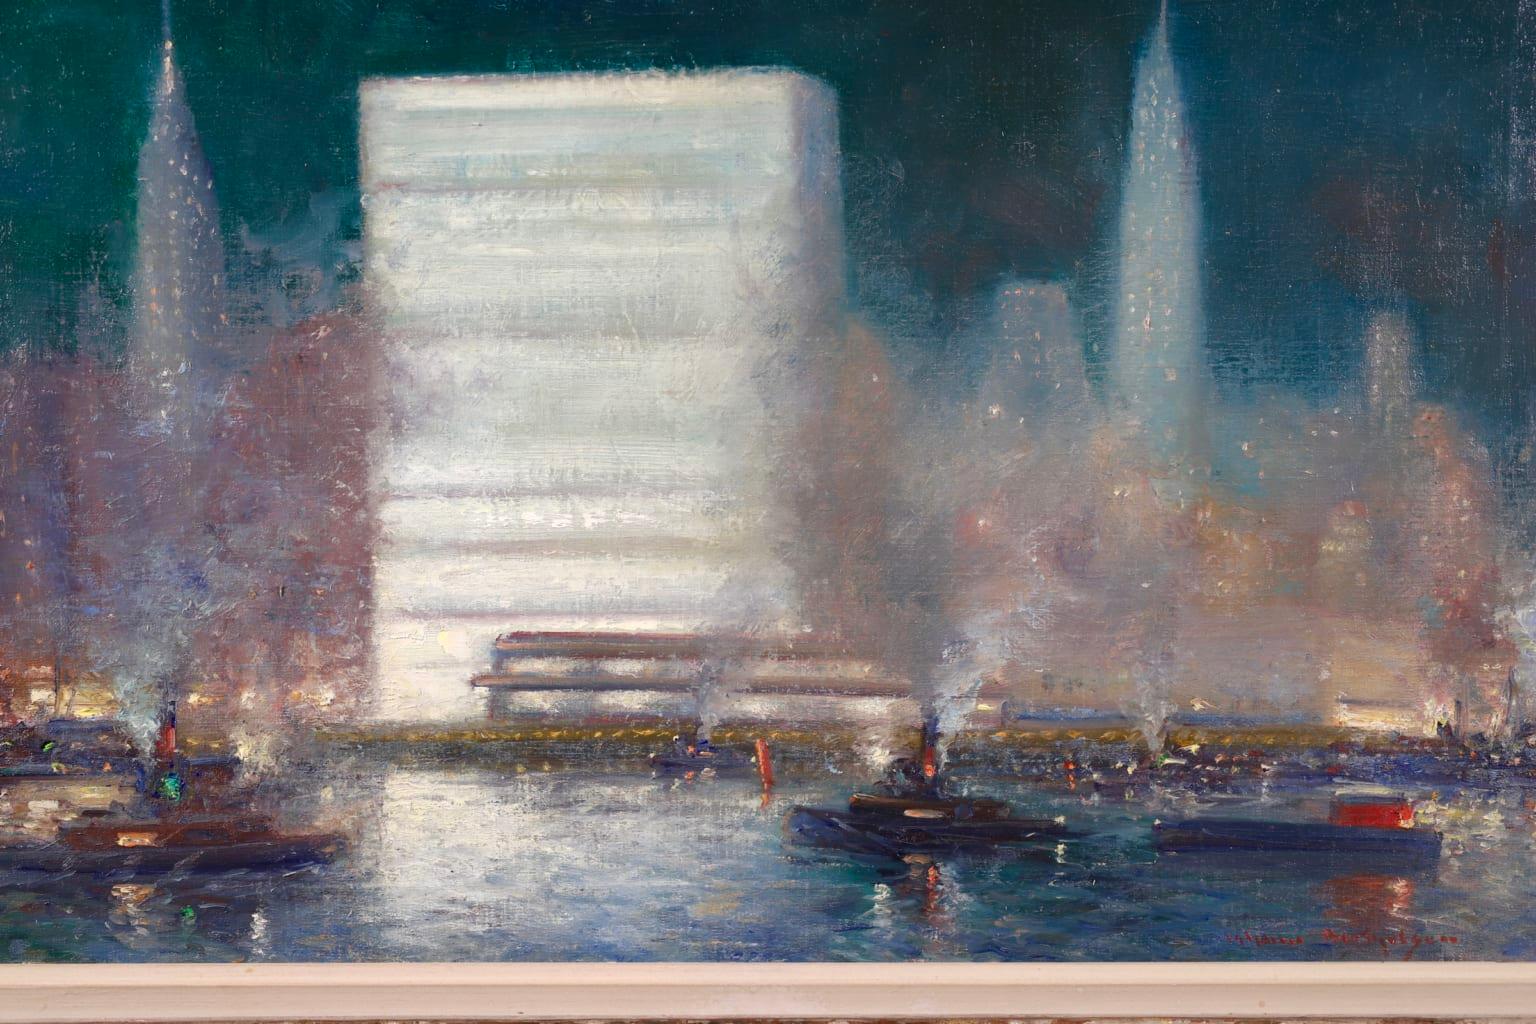 A stunning oil on canvas circa 1955 by American impressionist painter Johann Henrik Carl Berthelsen. The piece depicts a view of the illuminated waterfront buildings from the East River in New York - specifically the newly completed United Nations